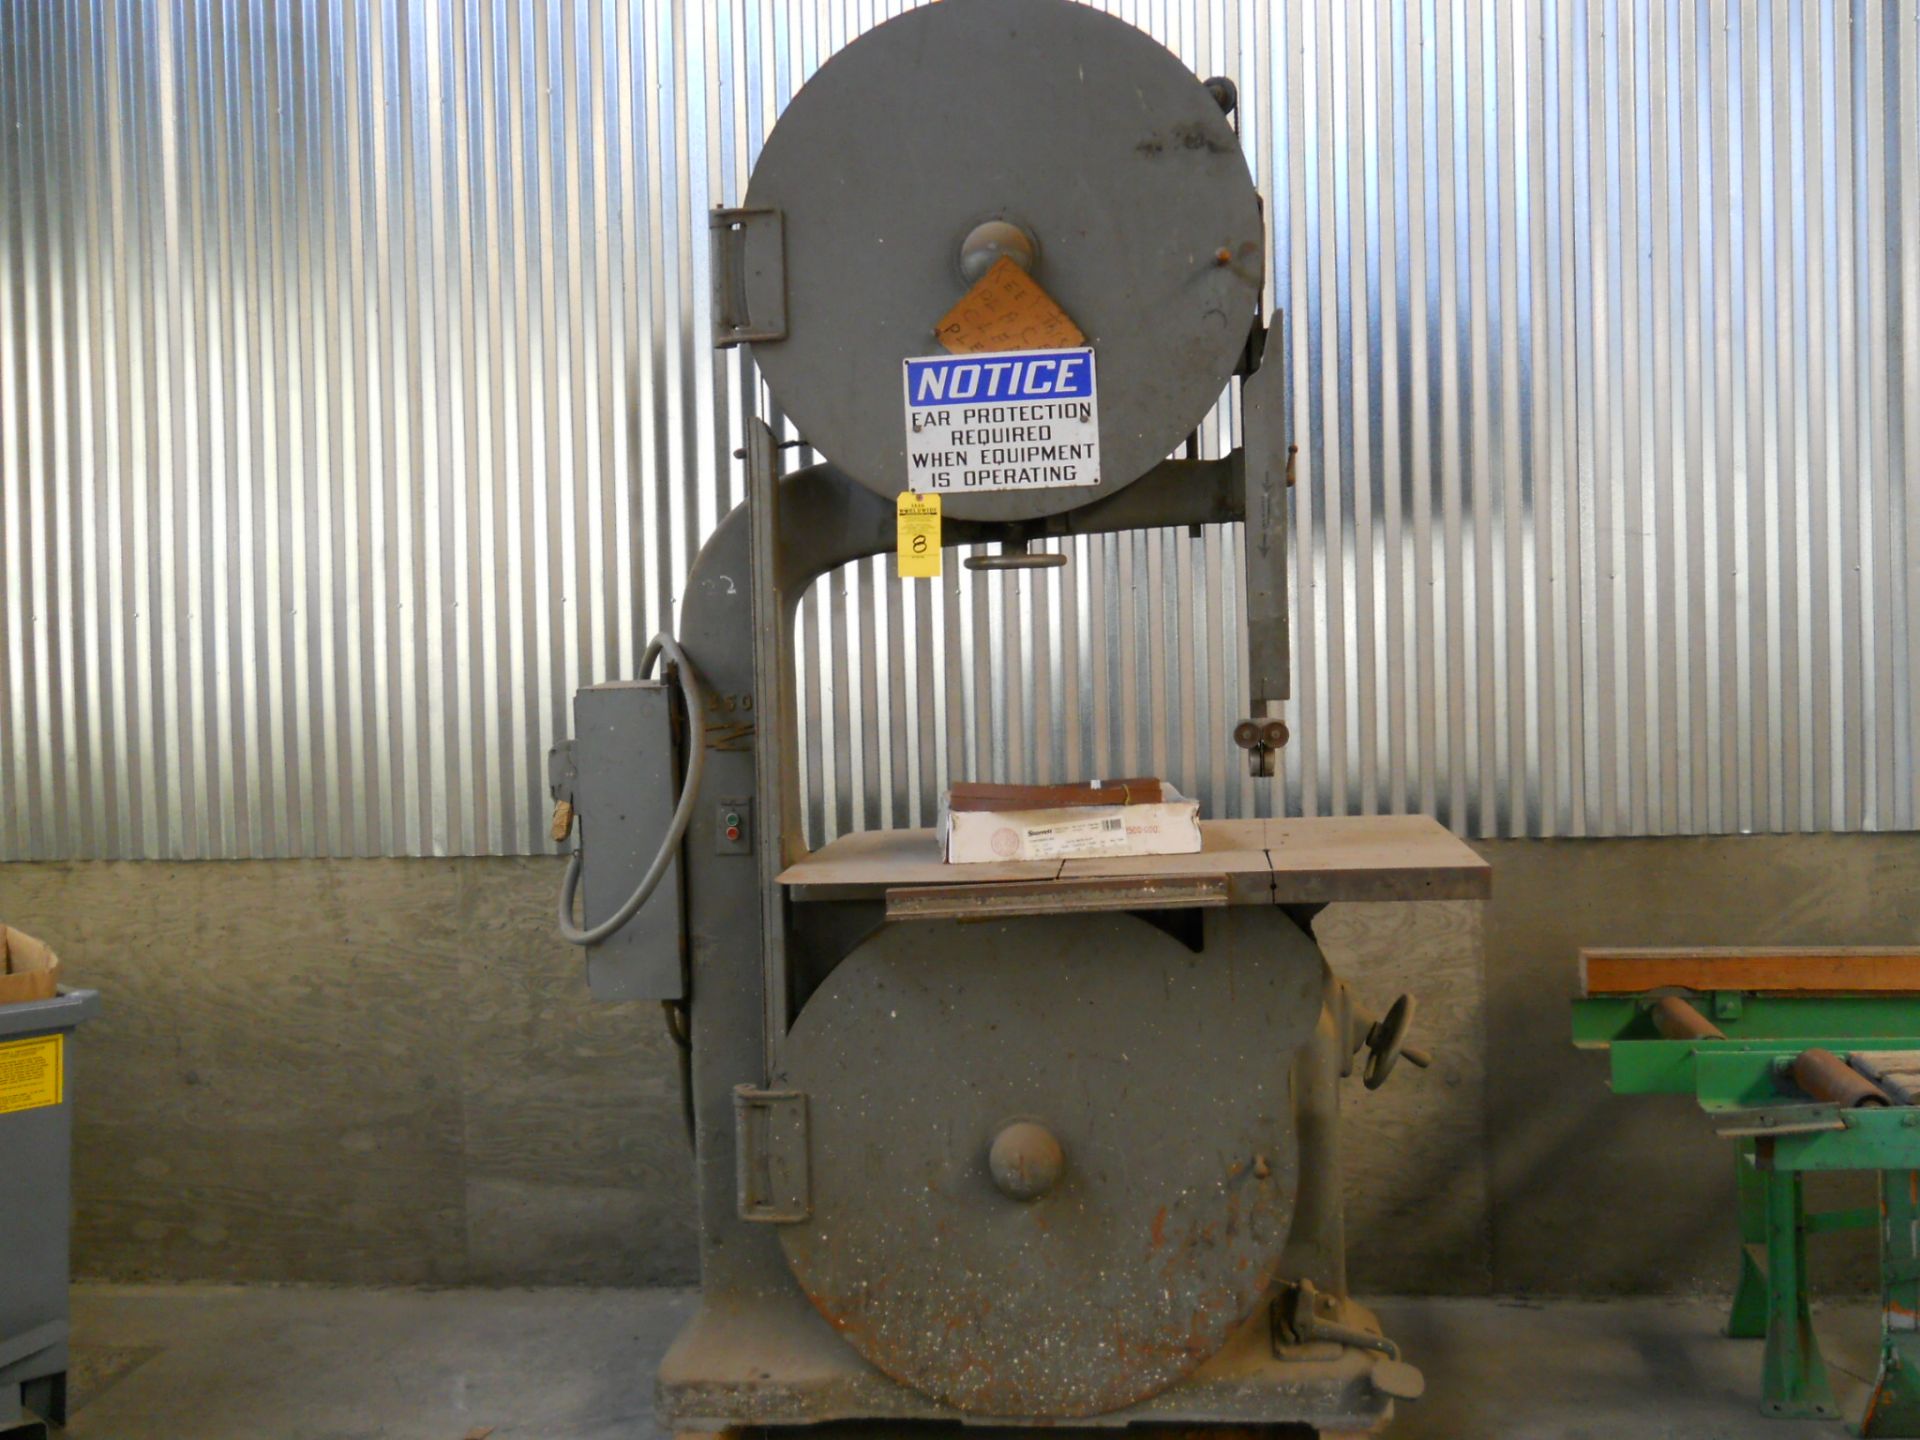 Lot (1)  Band Saw, Model 950, 20' 4" X 1" Blade, Manufacturer  J.A. Fay & Egan Co., 5 Hp 220/440 - Image 2 of 3